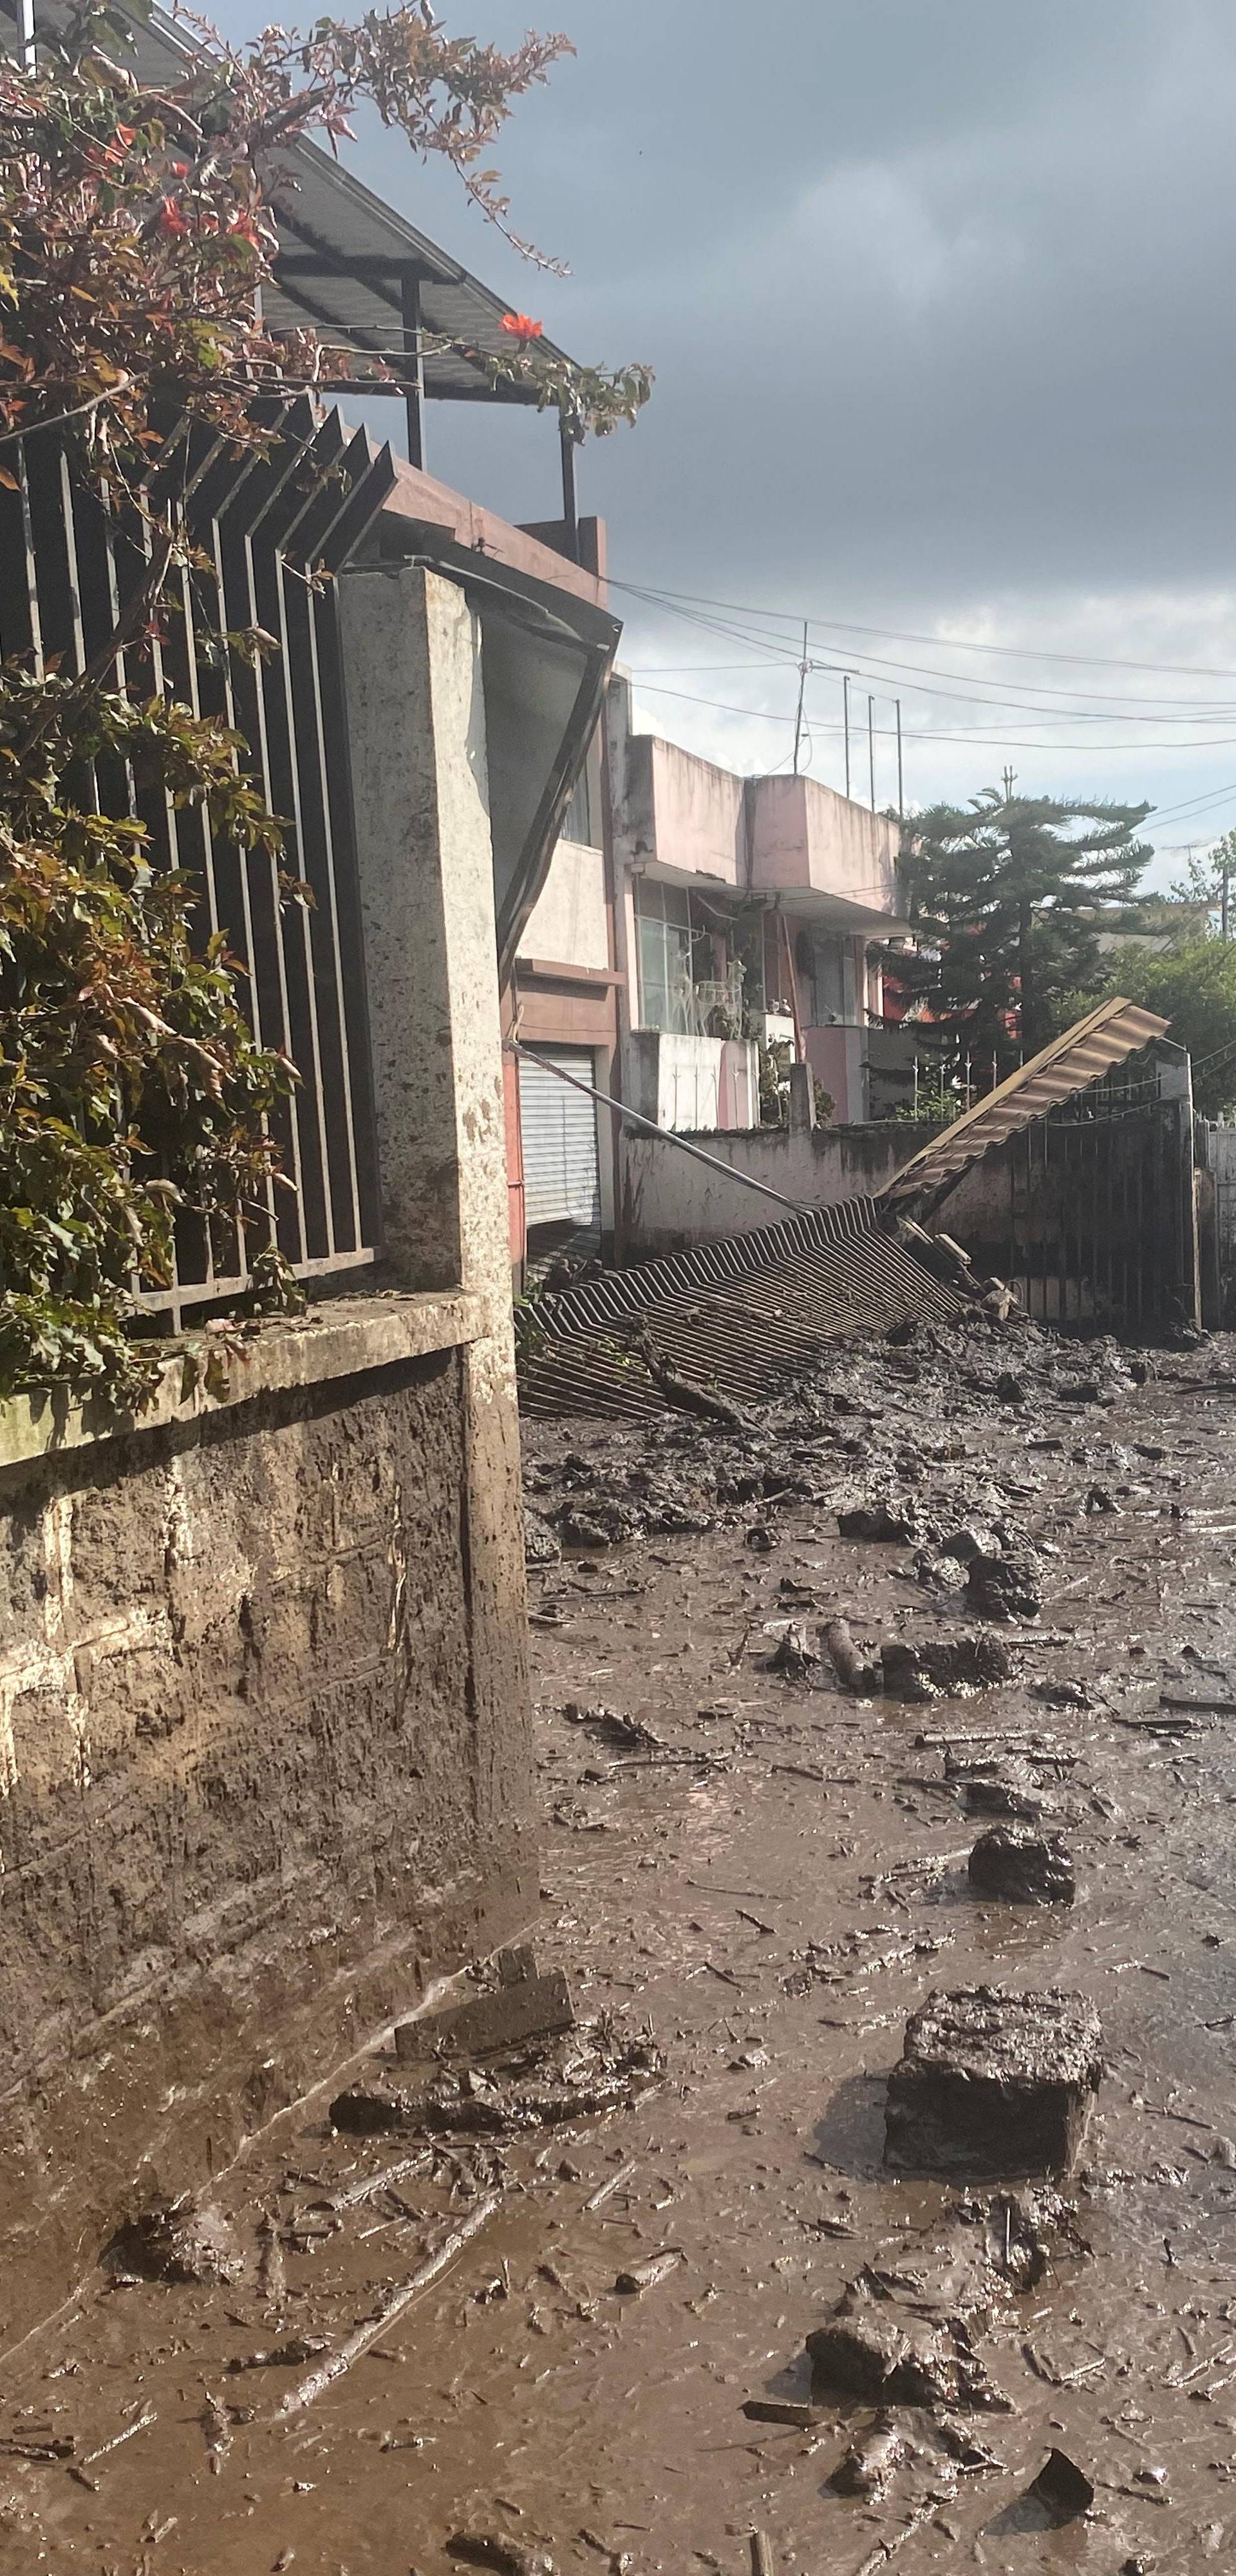 Flooding site and aftermath at La Gasca neighborhood in Quito, Ecuador